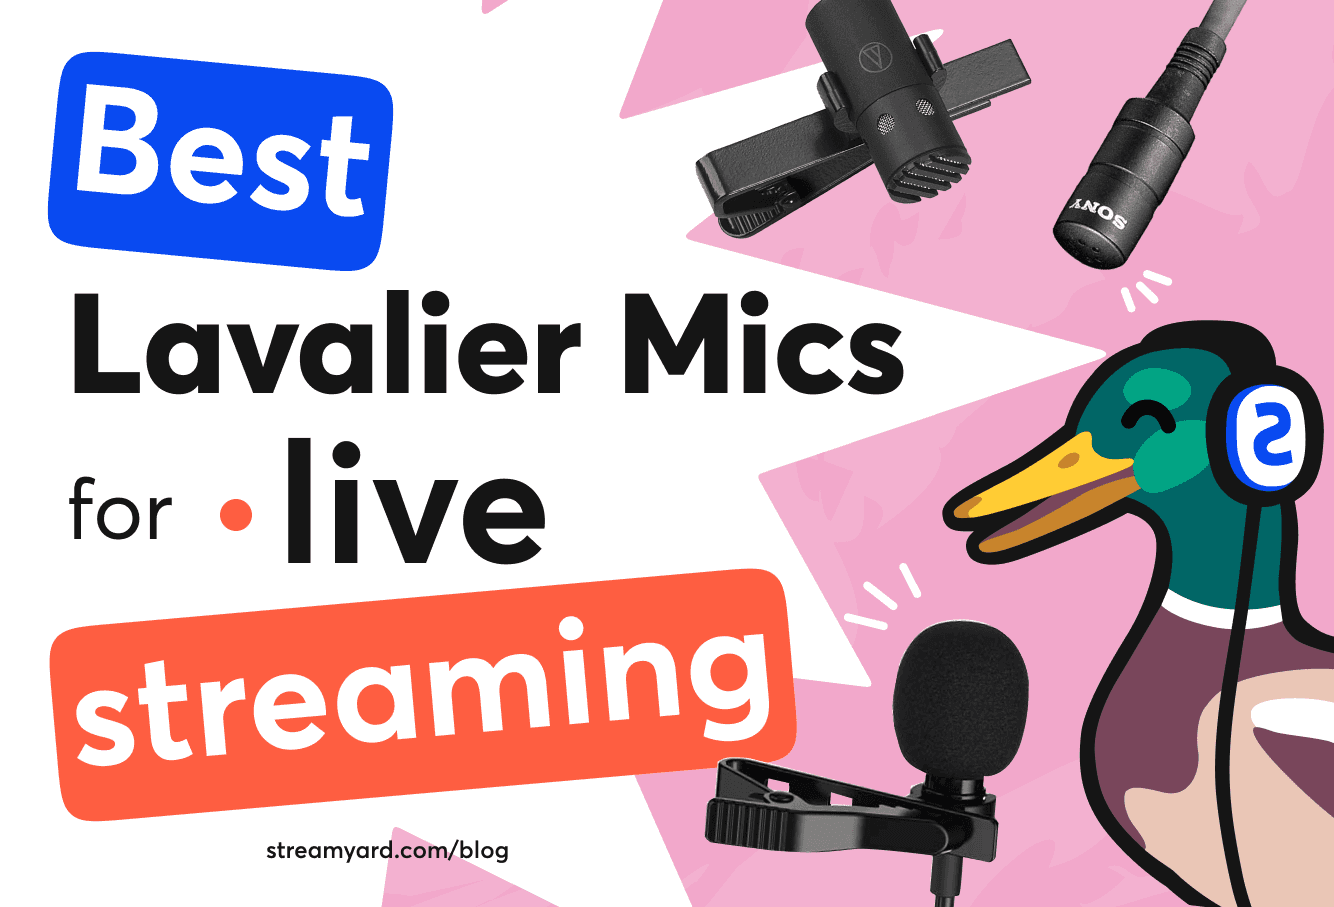 Learn about the best lavalier mics to use when live streaming. With a lavalier microphone, you can enhance your sound quality.